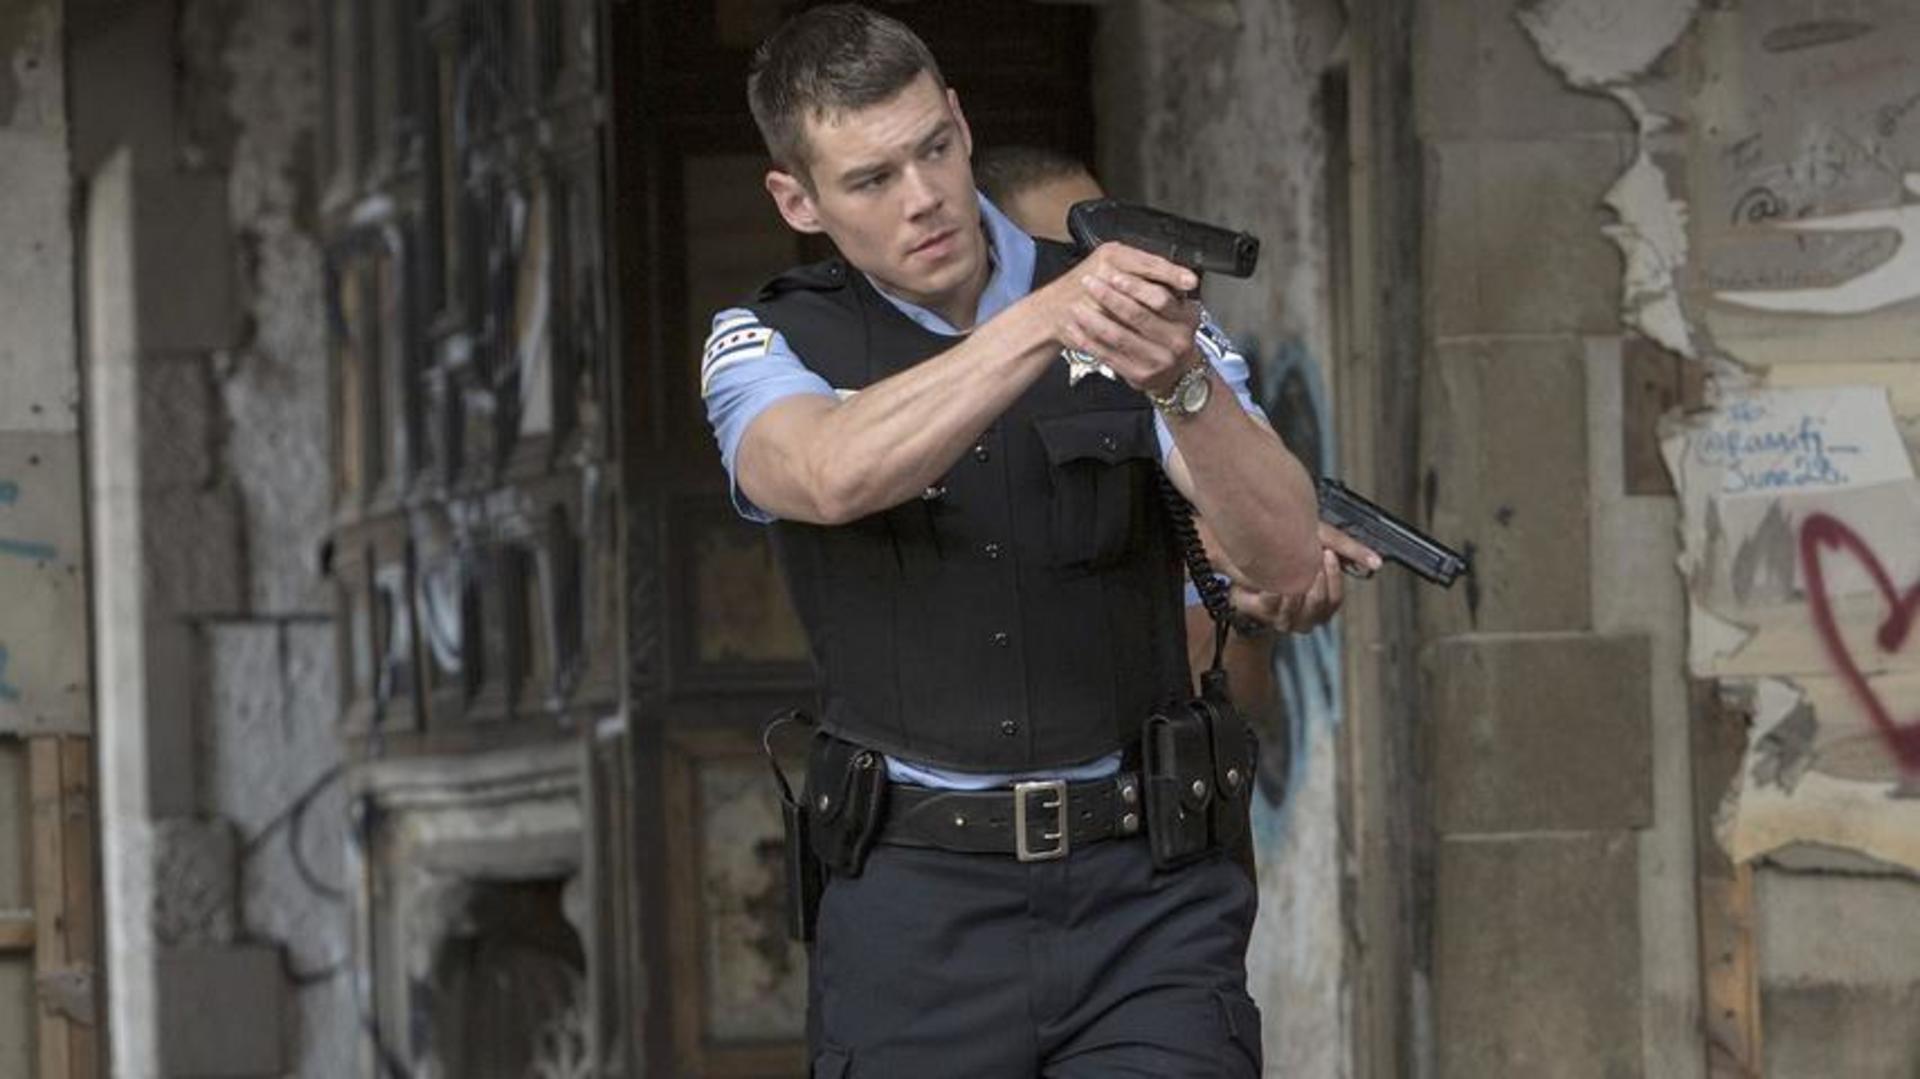 Image of actor Brian J. Smith, in character as Chicago policeman Will Gorski from Sense8